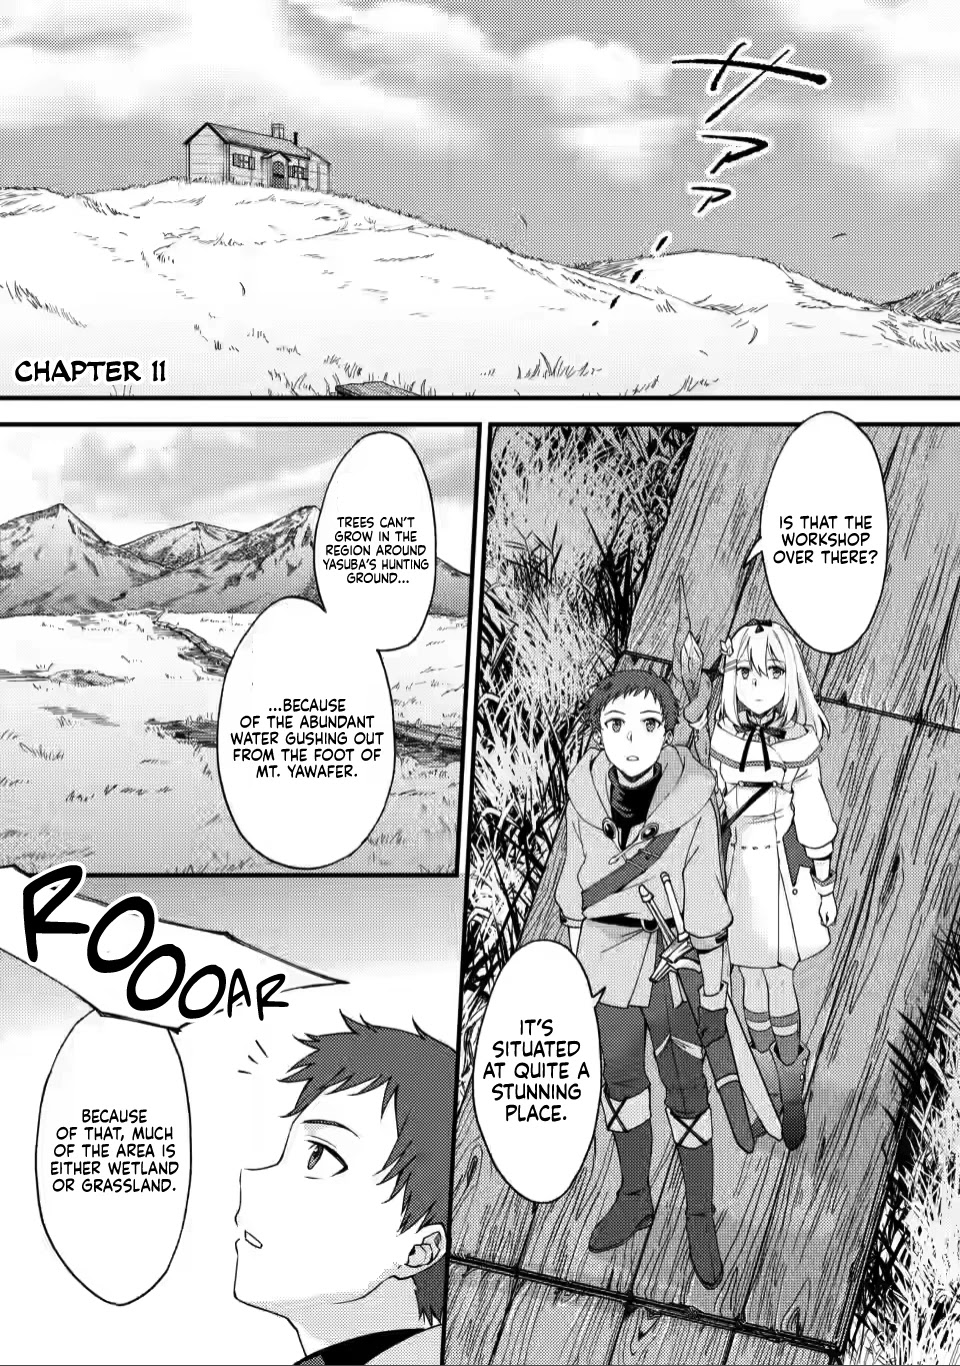 A Sword Master Childhood Friend Power Harassed Me Harshly, So I Broke Off Our Relationship And Make A Fresh Start At The Frontier As A Magic Swordsman. - Page 1